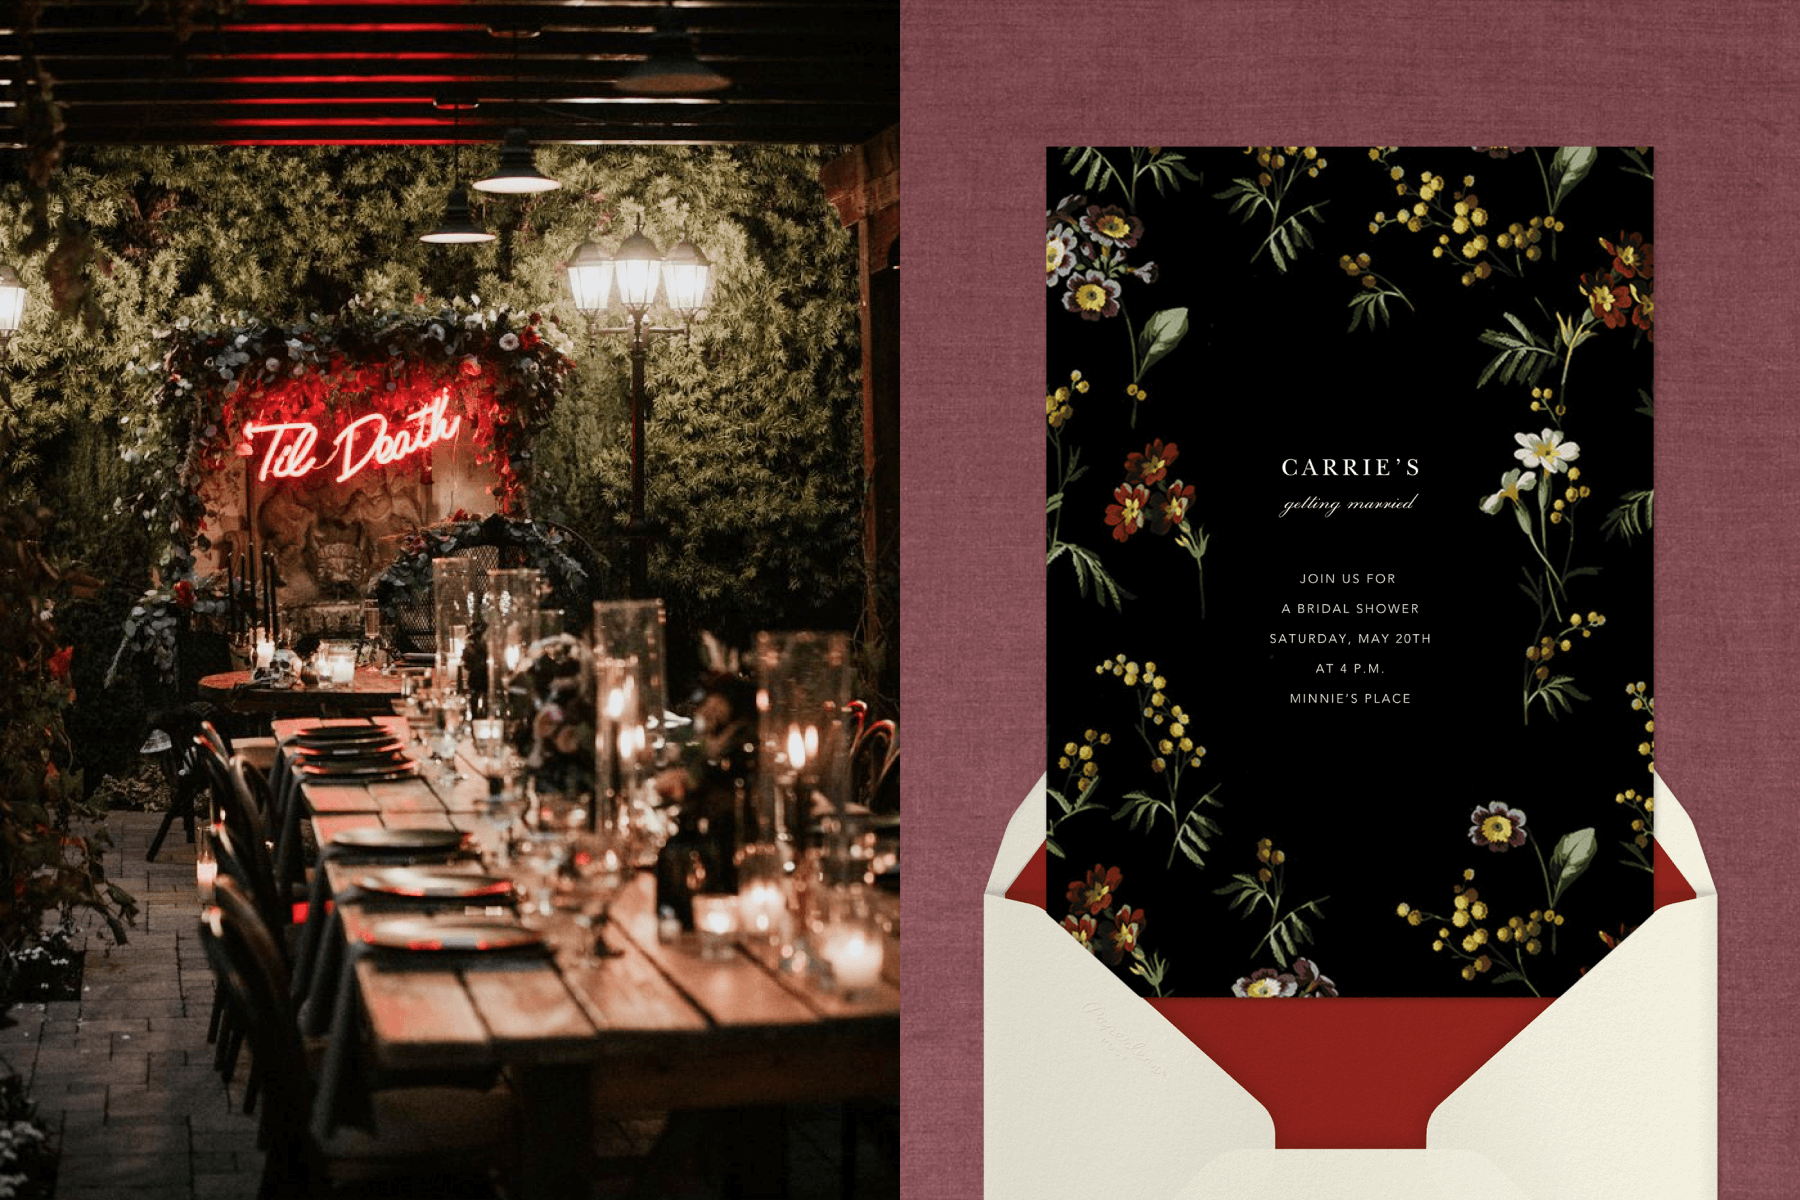 Left: A long wooden table at a restaurant at night set for a party with a neon sign that reads “‘Til Death.” Right: A black engagement party invitation with delicate flowers around the border.